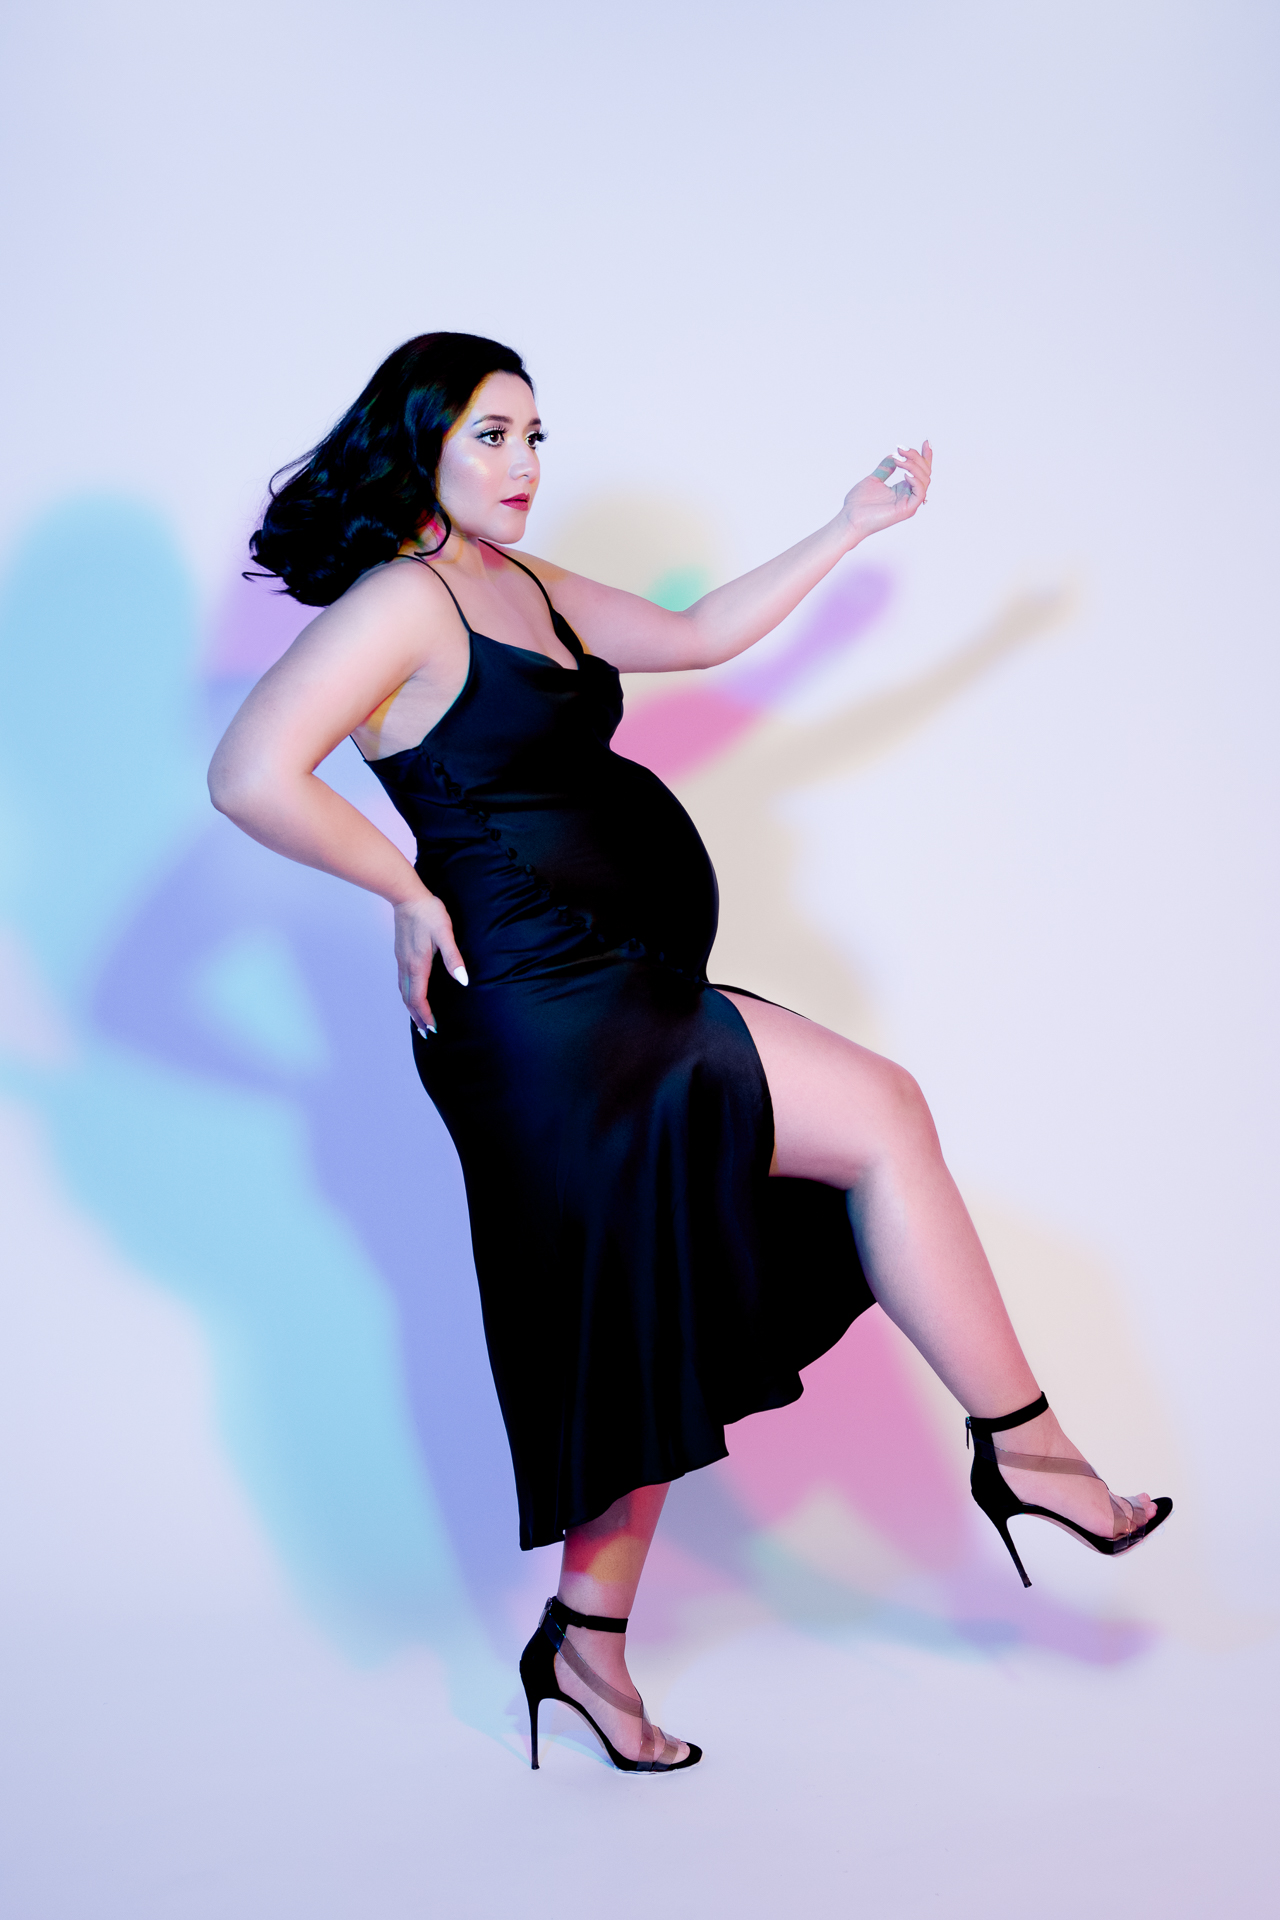 Pregnant woman wearing black dress and black high heels. White backdrop reflects colorful shadows.